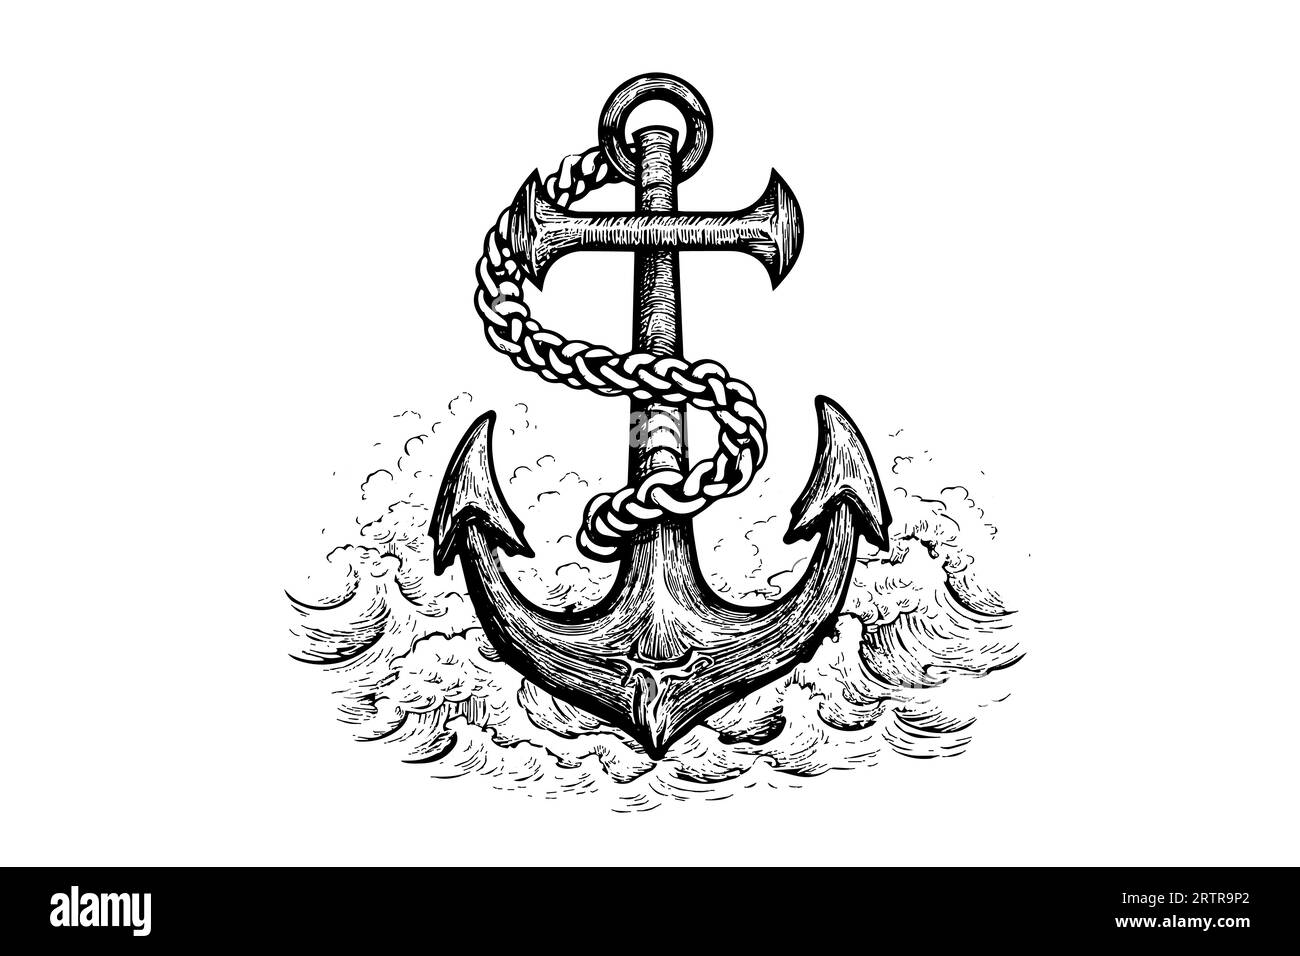 Ship sea anchor and rope in vintage engraving style. Sketch hand